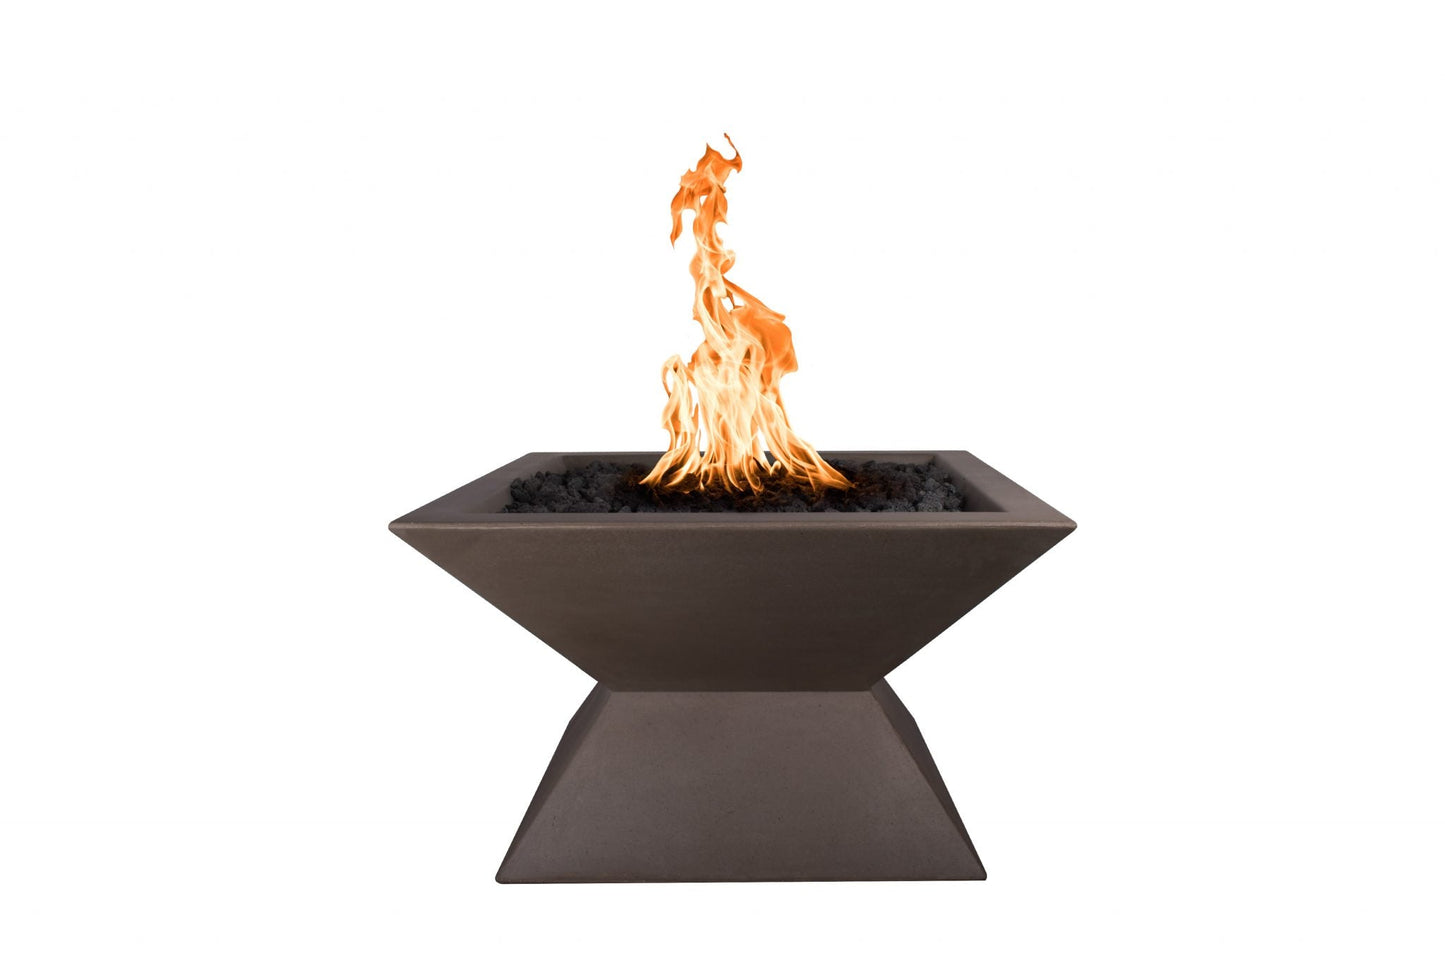 The Outdoor Plus Square Uxmal 30" Hammered Copper Liquid Propane Fire Pit with 110V Electronic Ignition